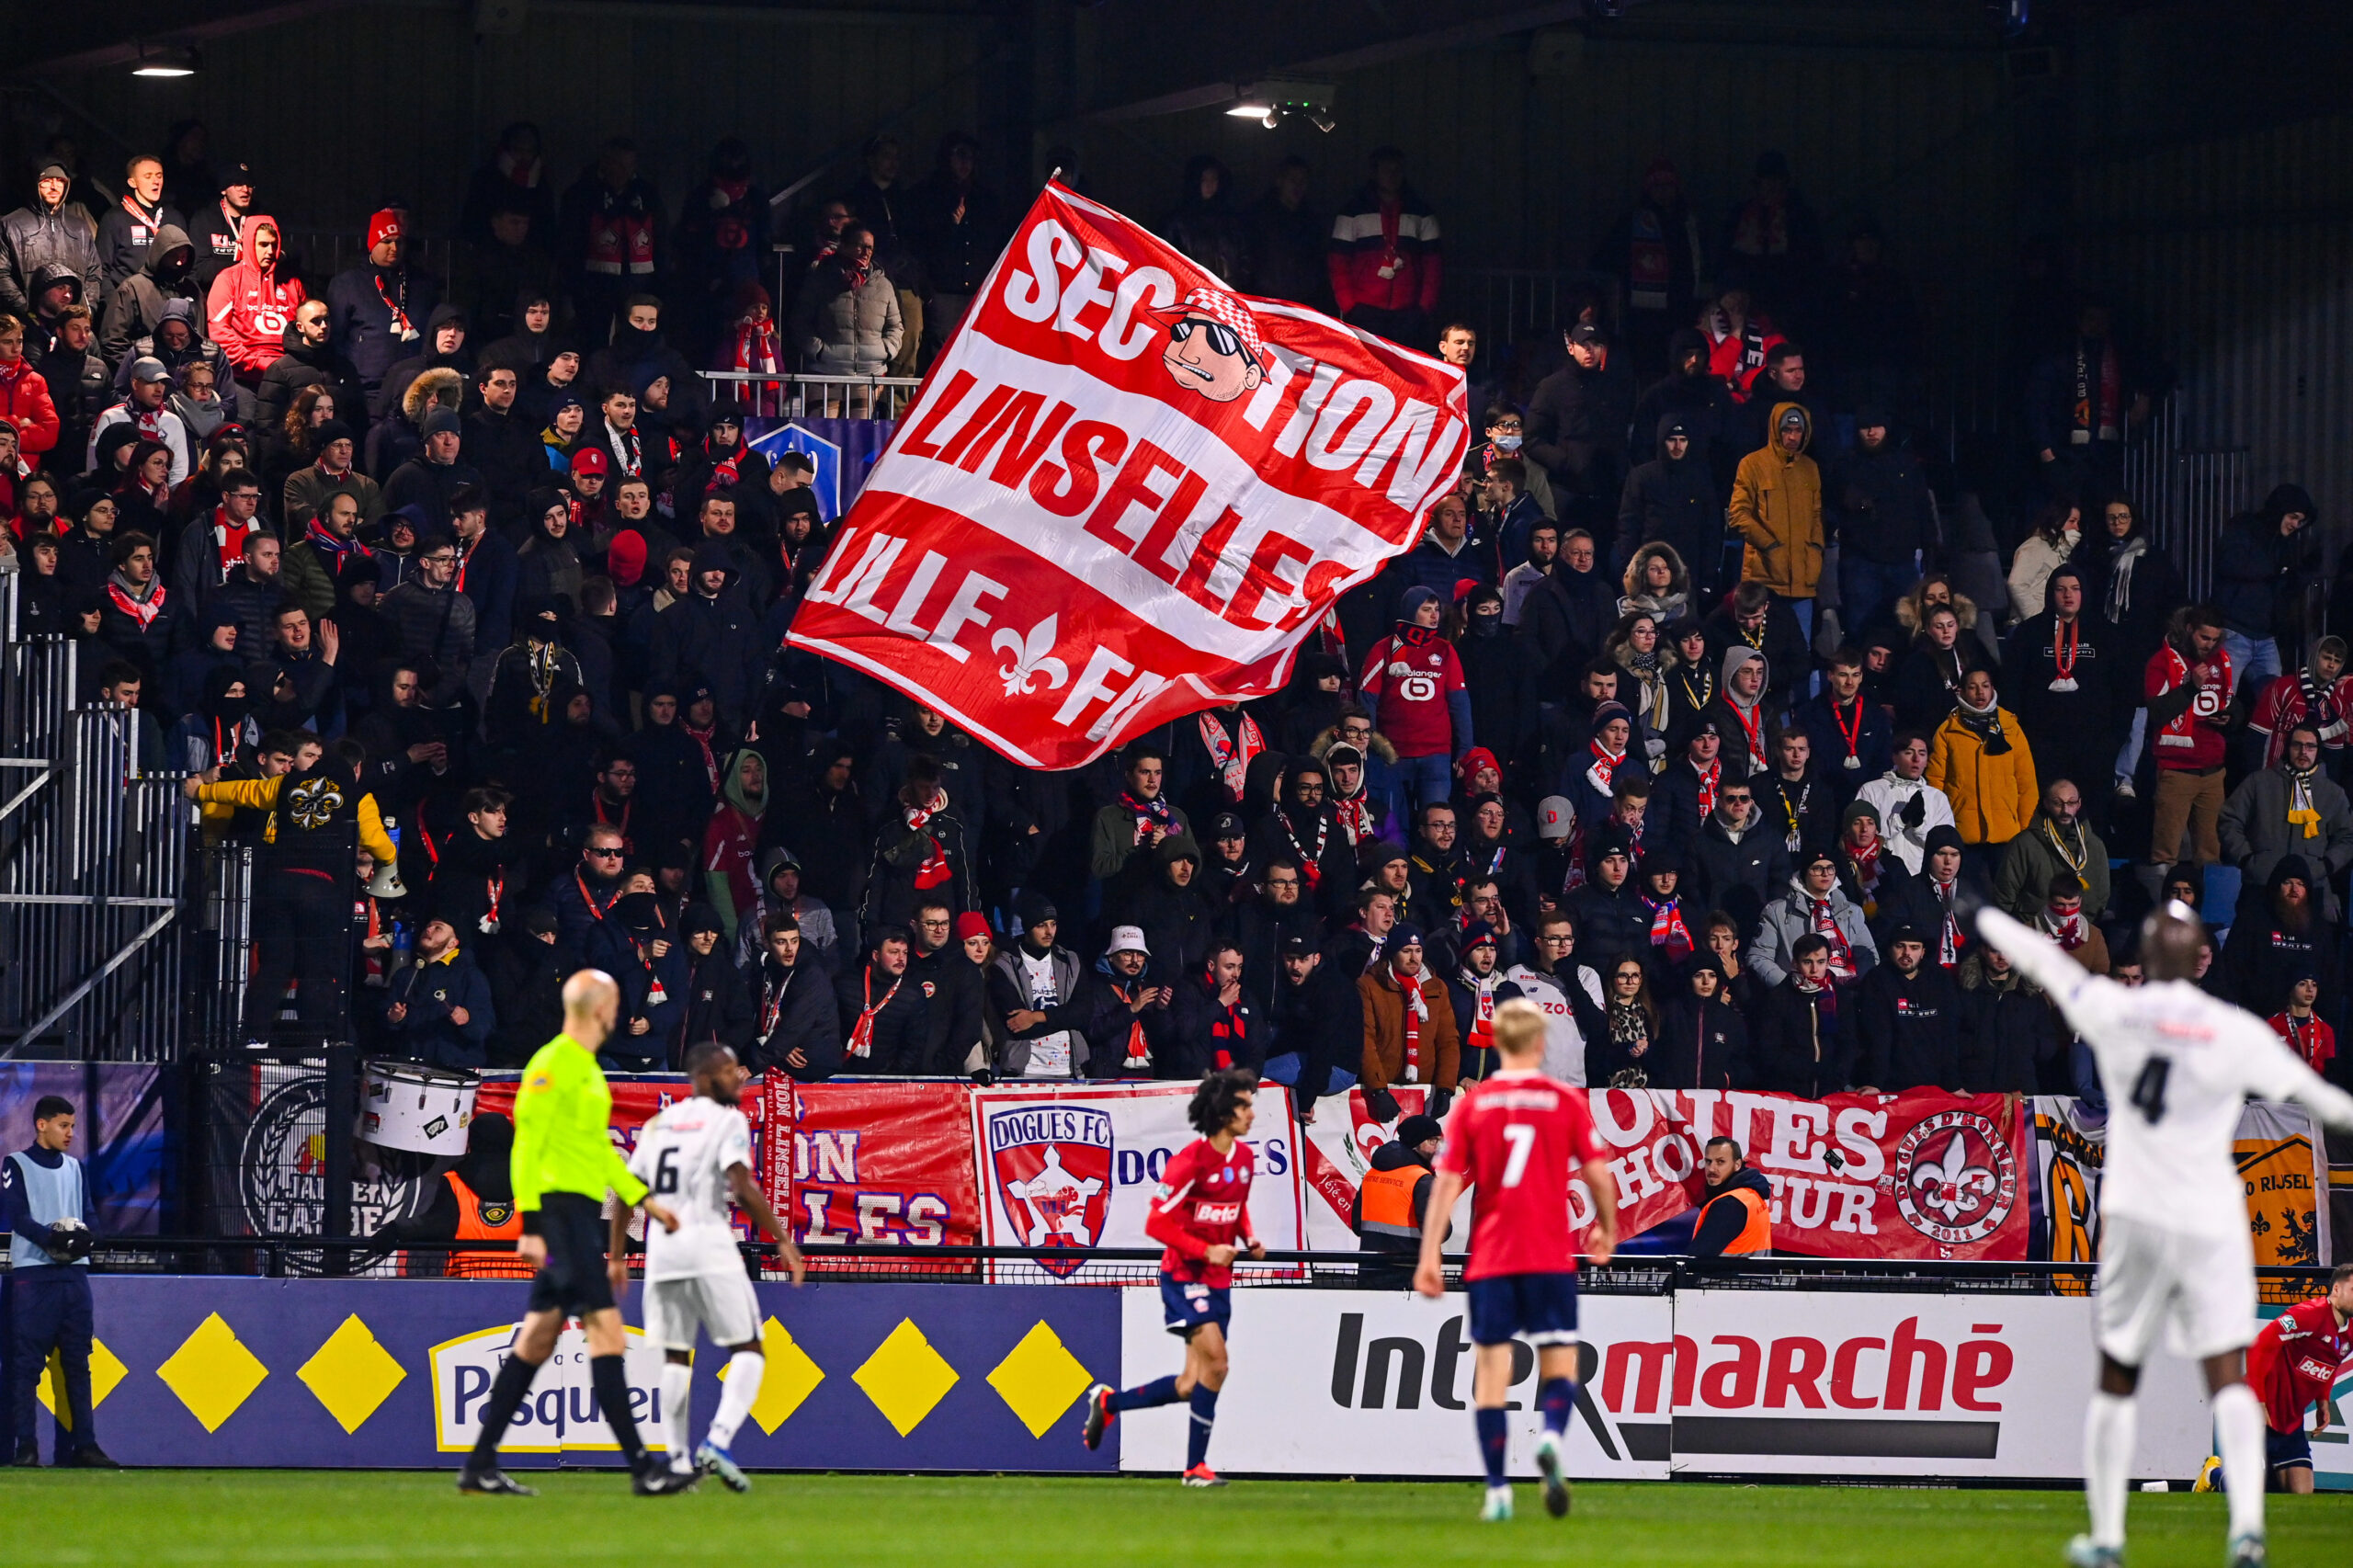 LOSC supporters